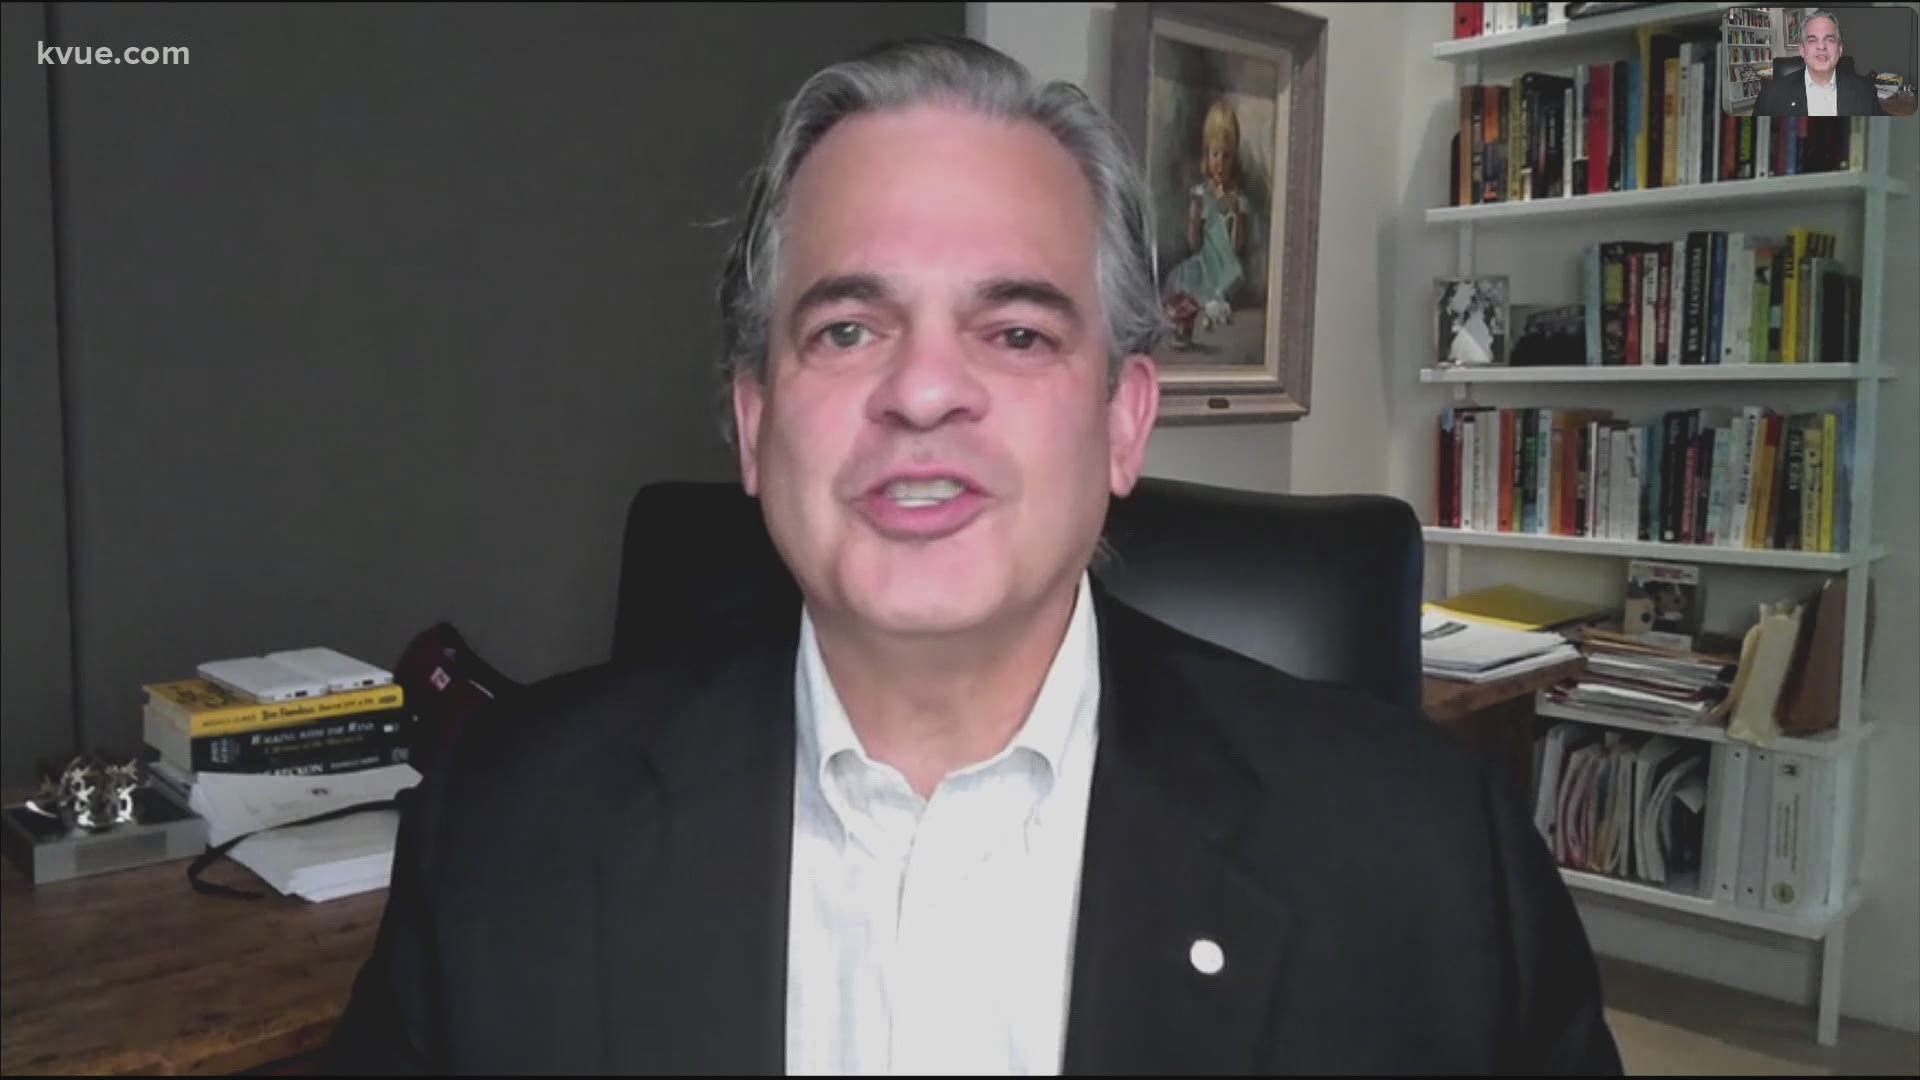 Mayor Steve Adler joined KVUE Daybreak to talk about COVID-19 and the police budget cuts.